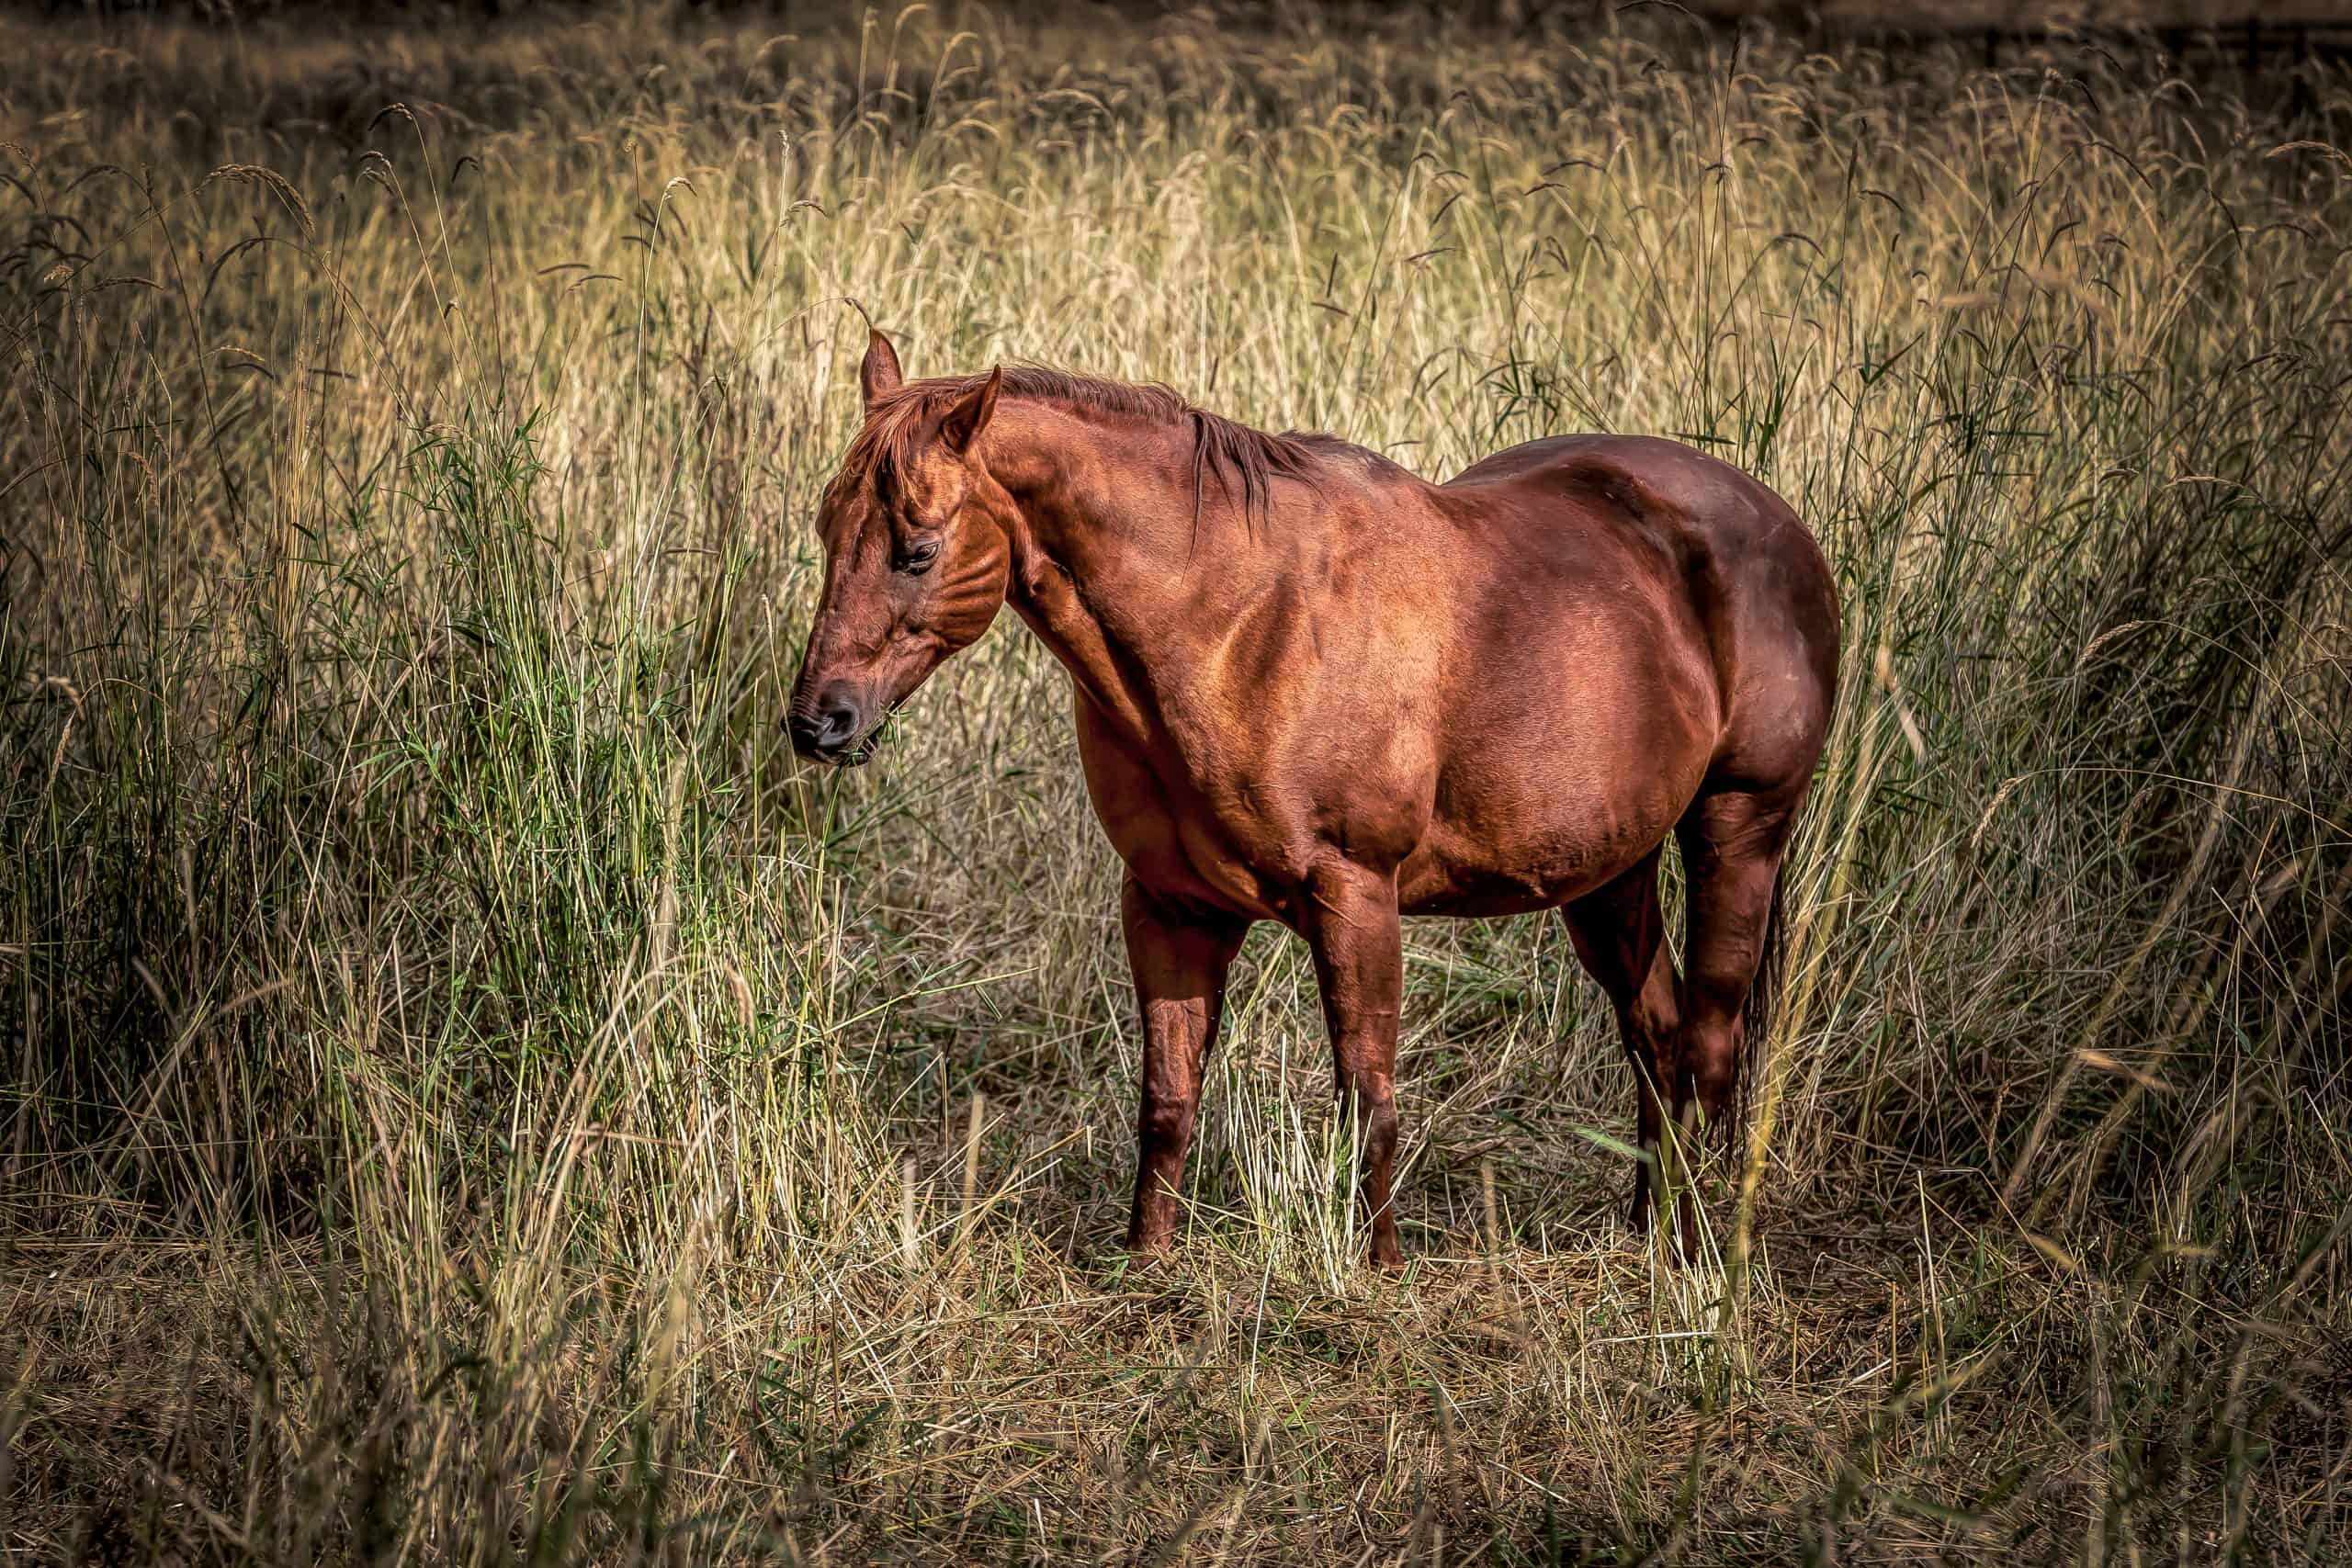 A beautiful chestnut color horse in a grassy field near Rathdrum, Idaho.